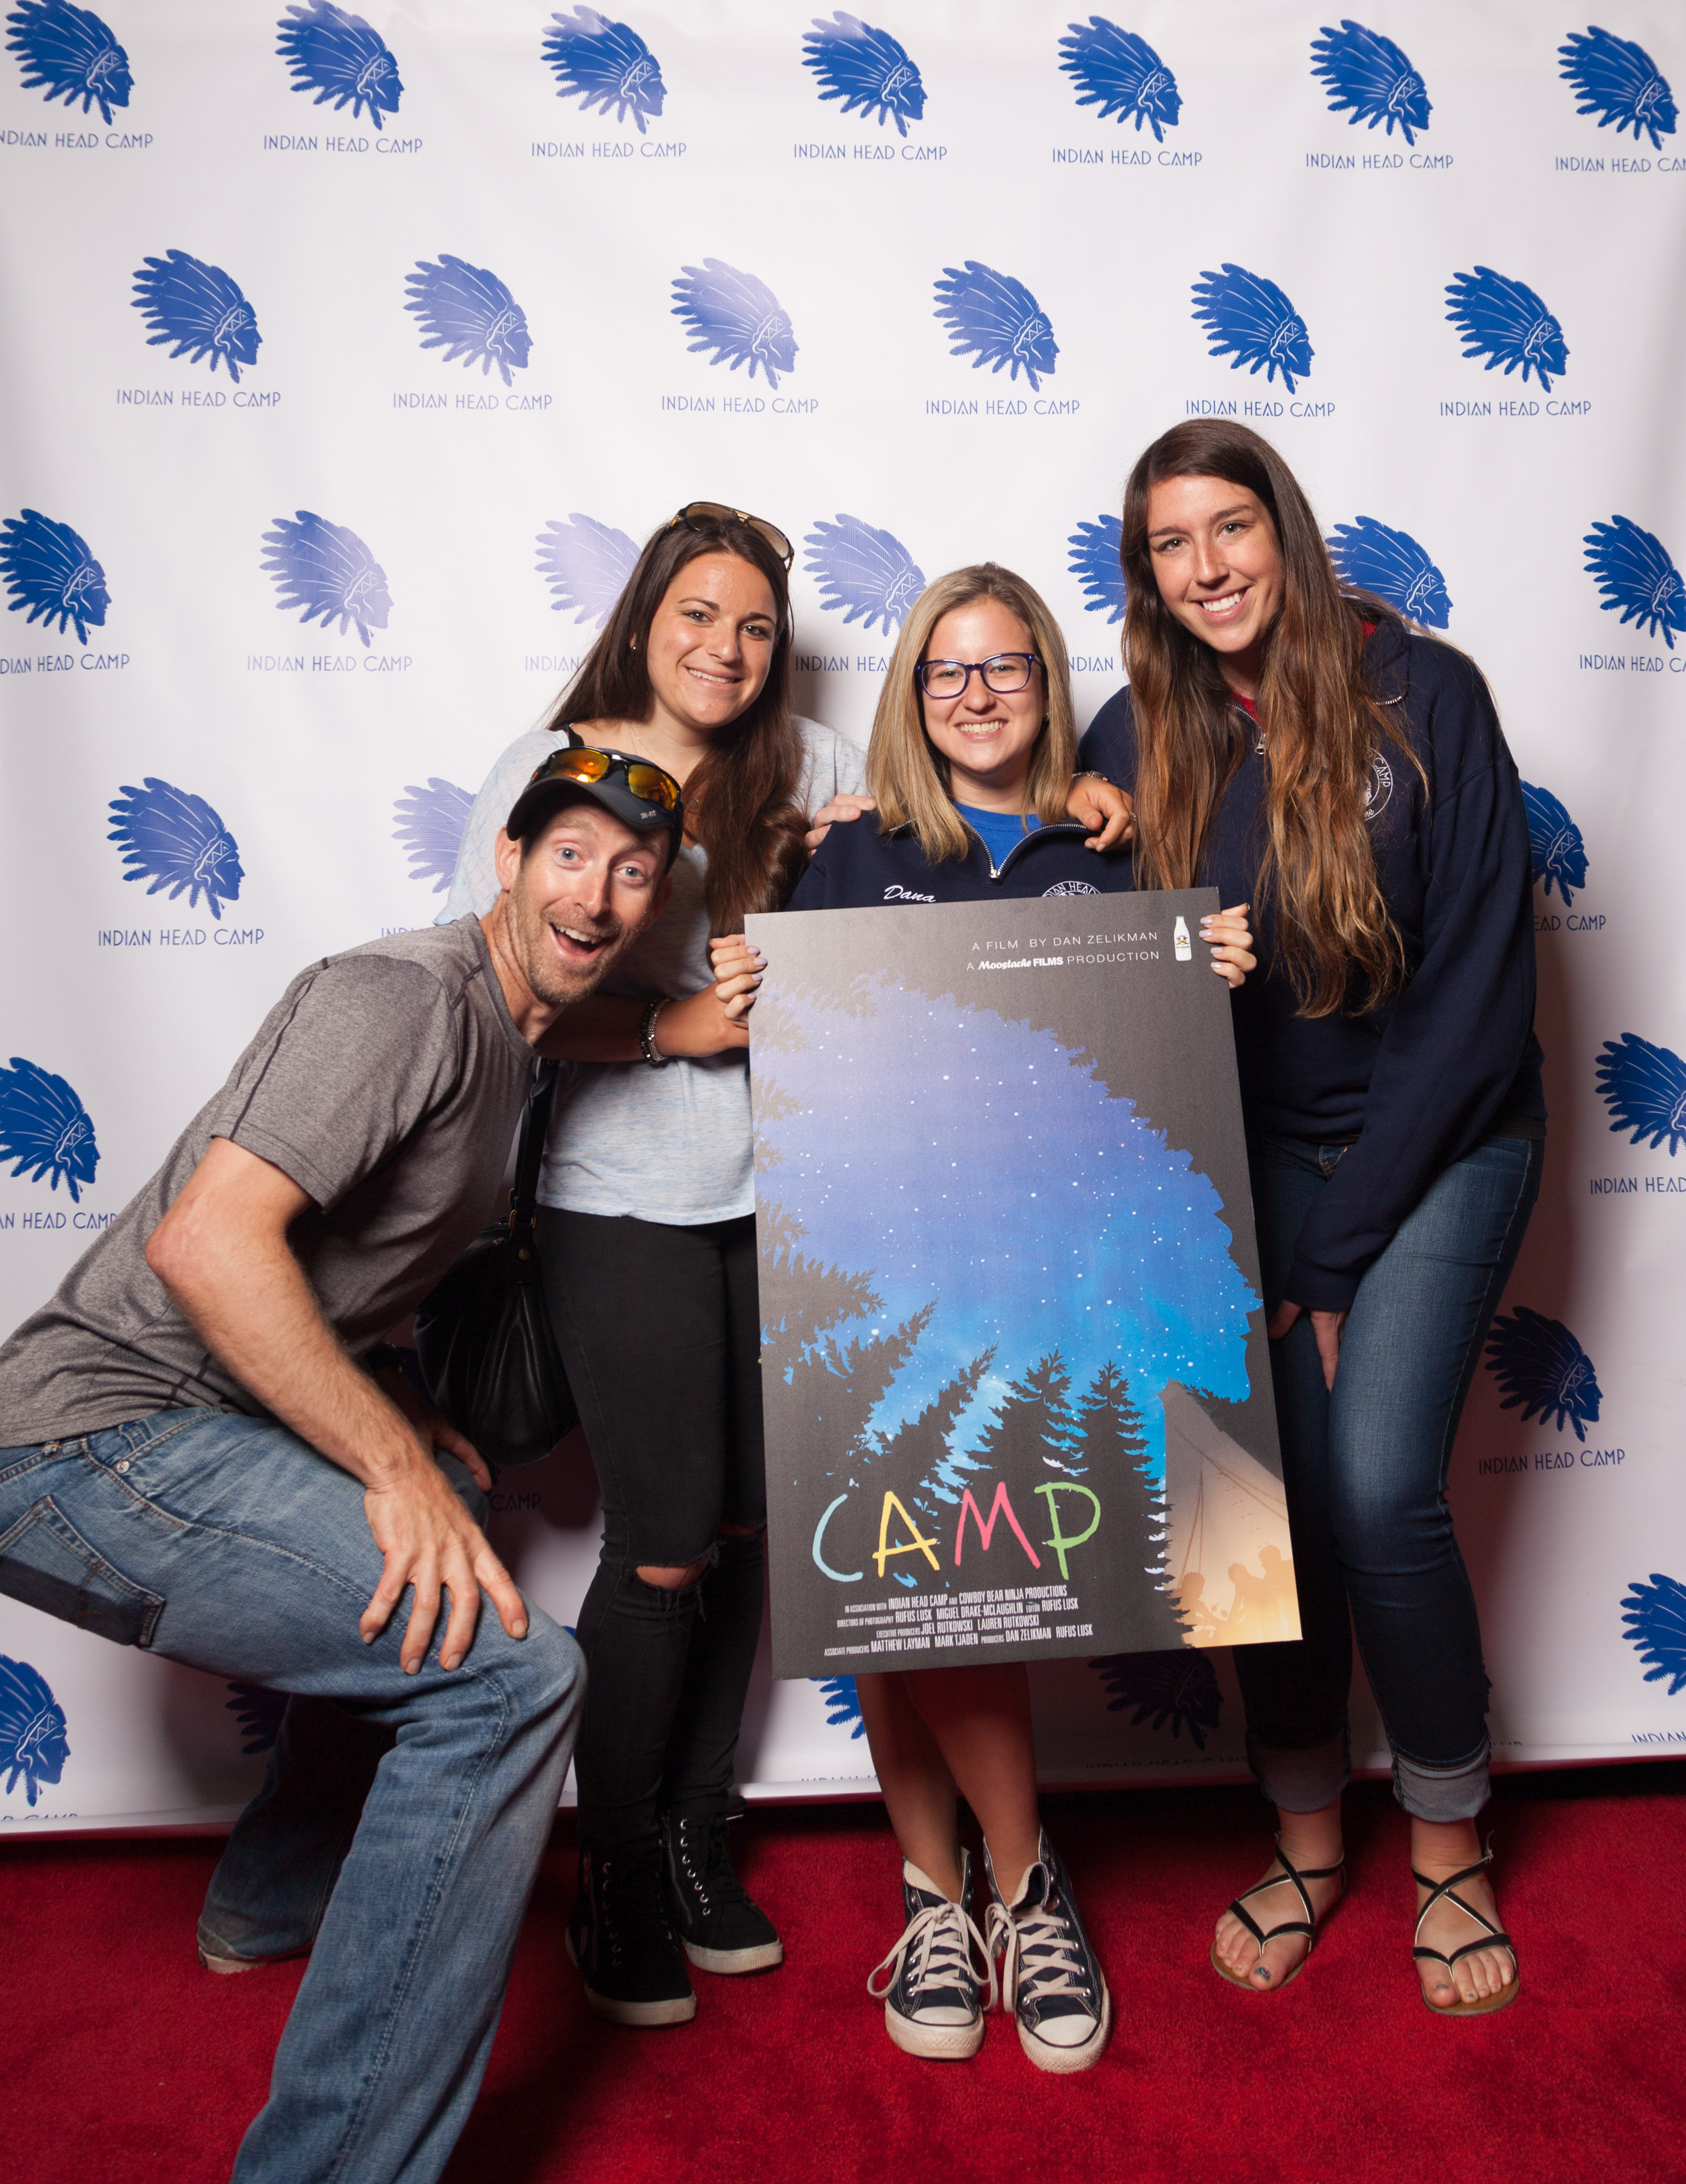 Producer Mark Tjaden with Dani Cohen, Dana Putterman, and Jessica Knysz at the premier of Camp at the Tarrytown Music Hall in New York.